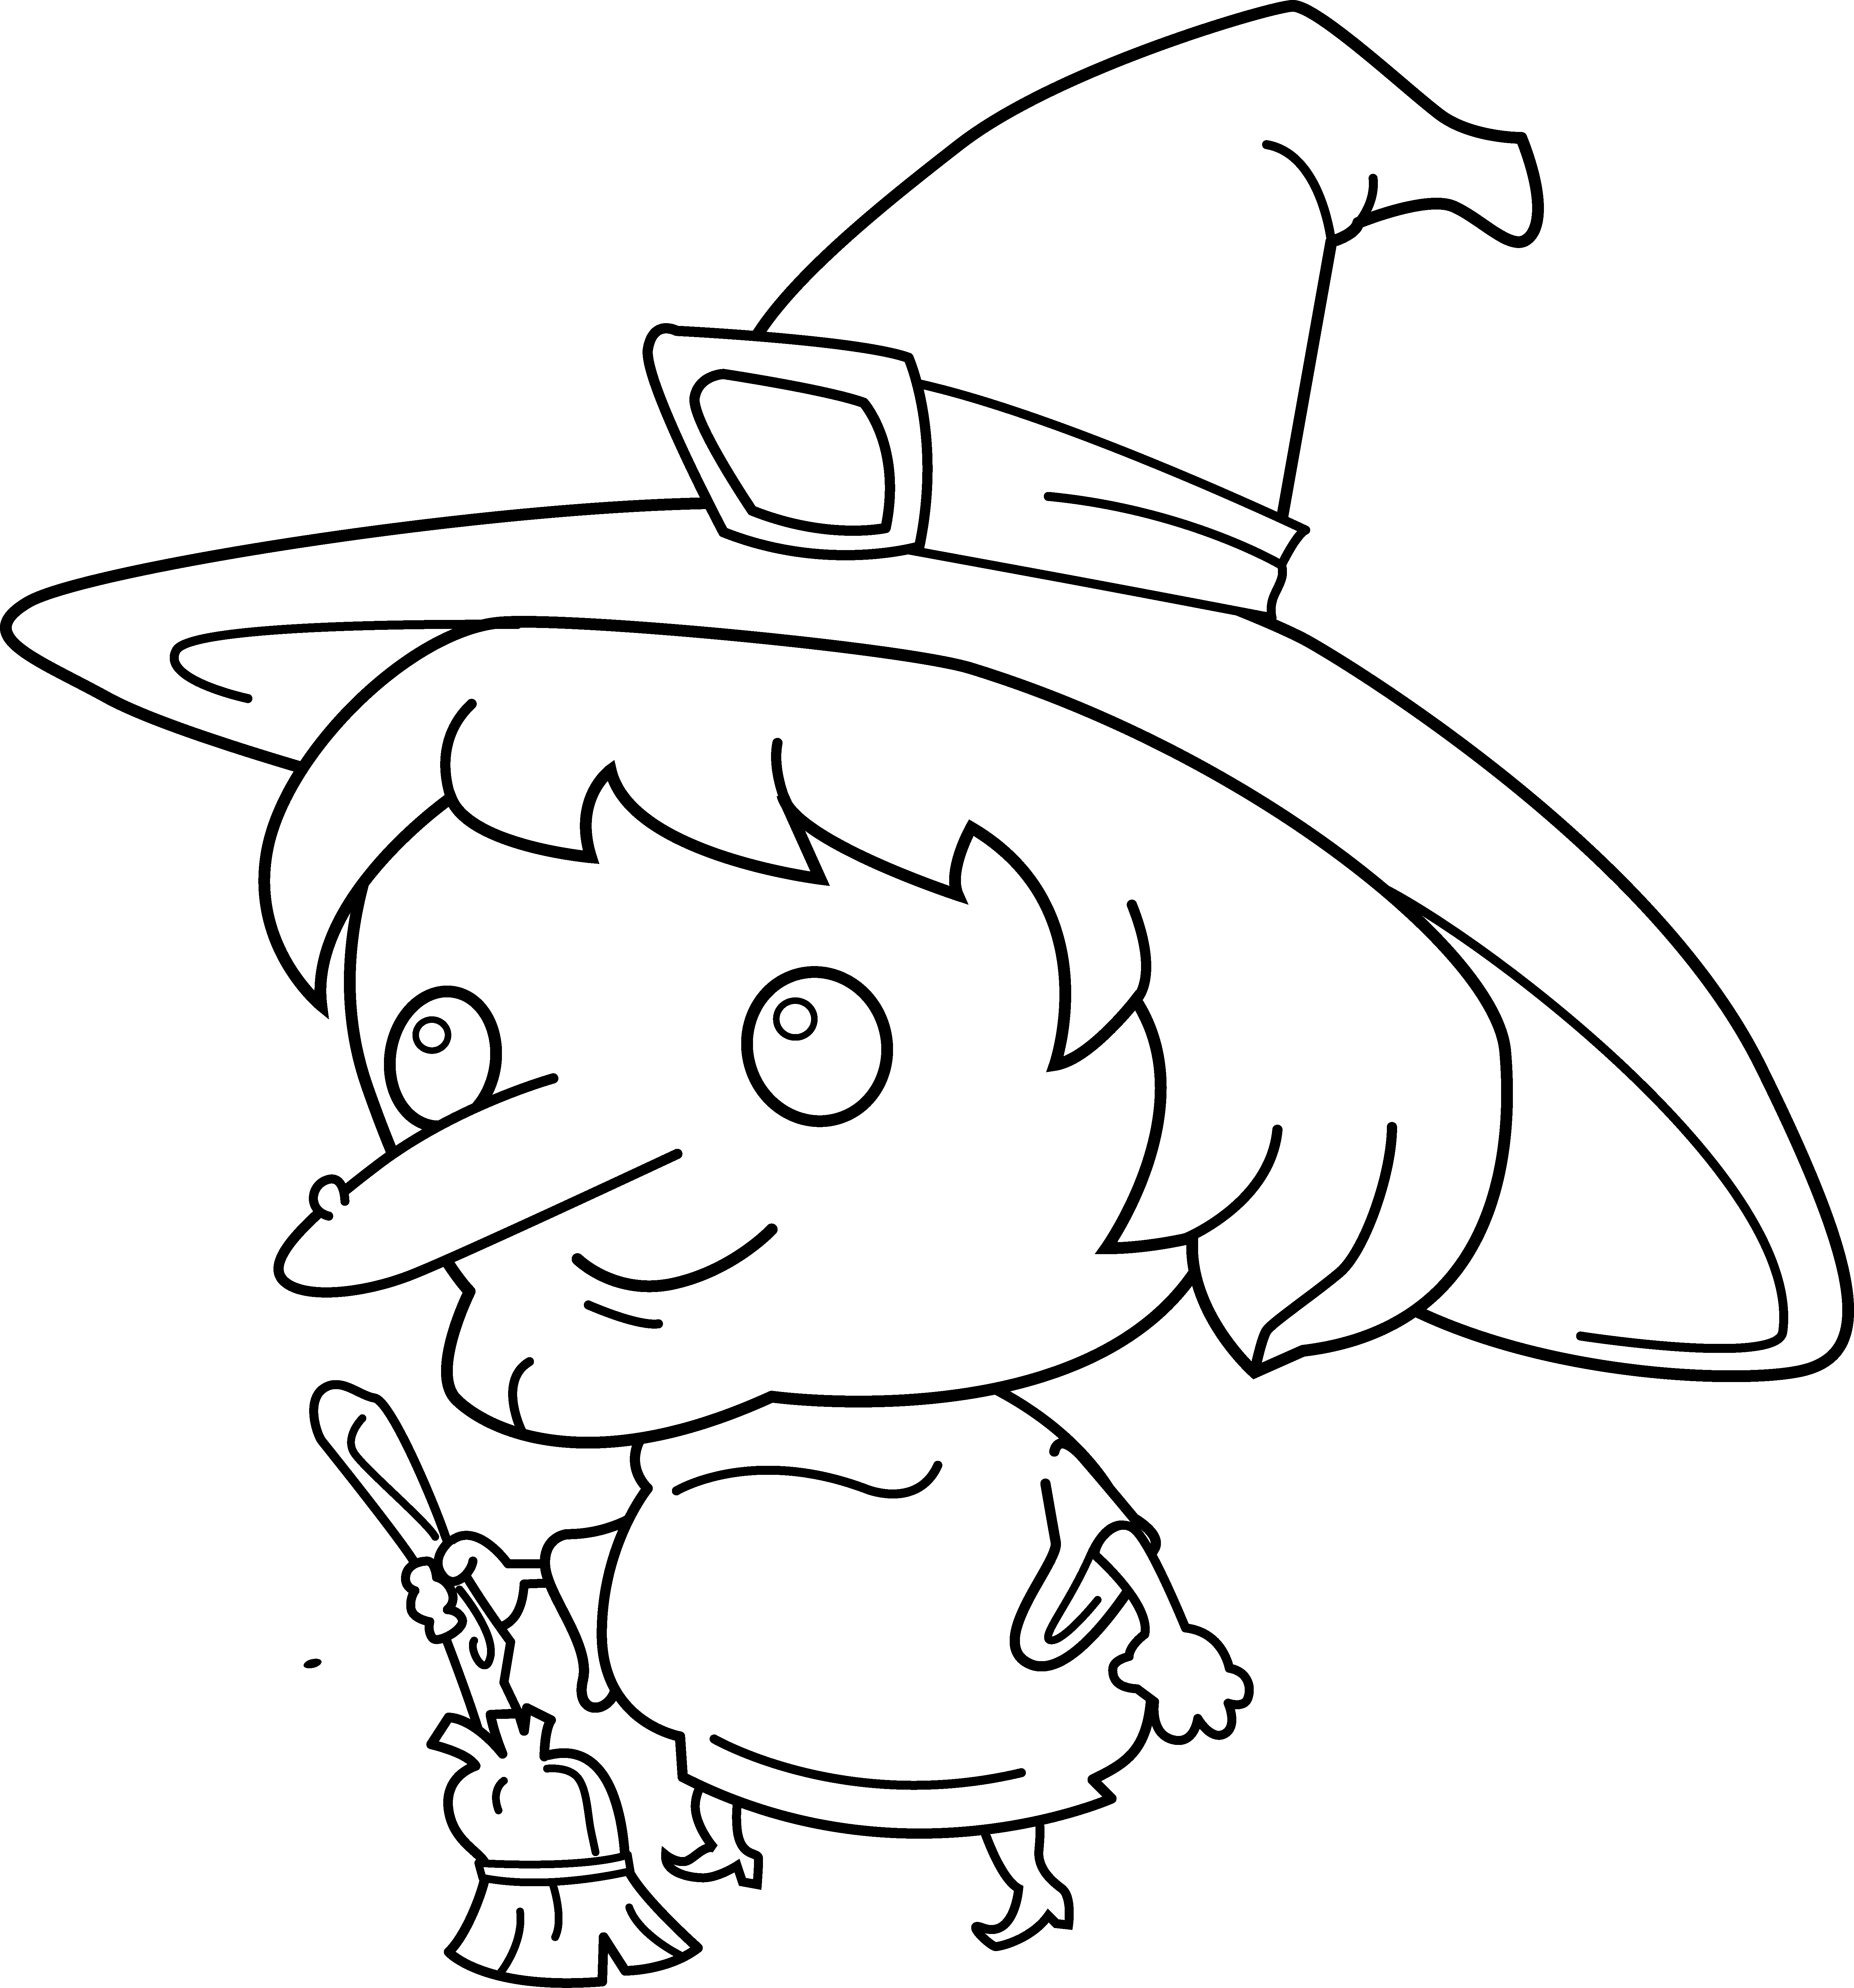 Witch clipart crashed. Cute drawing at getdrawings